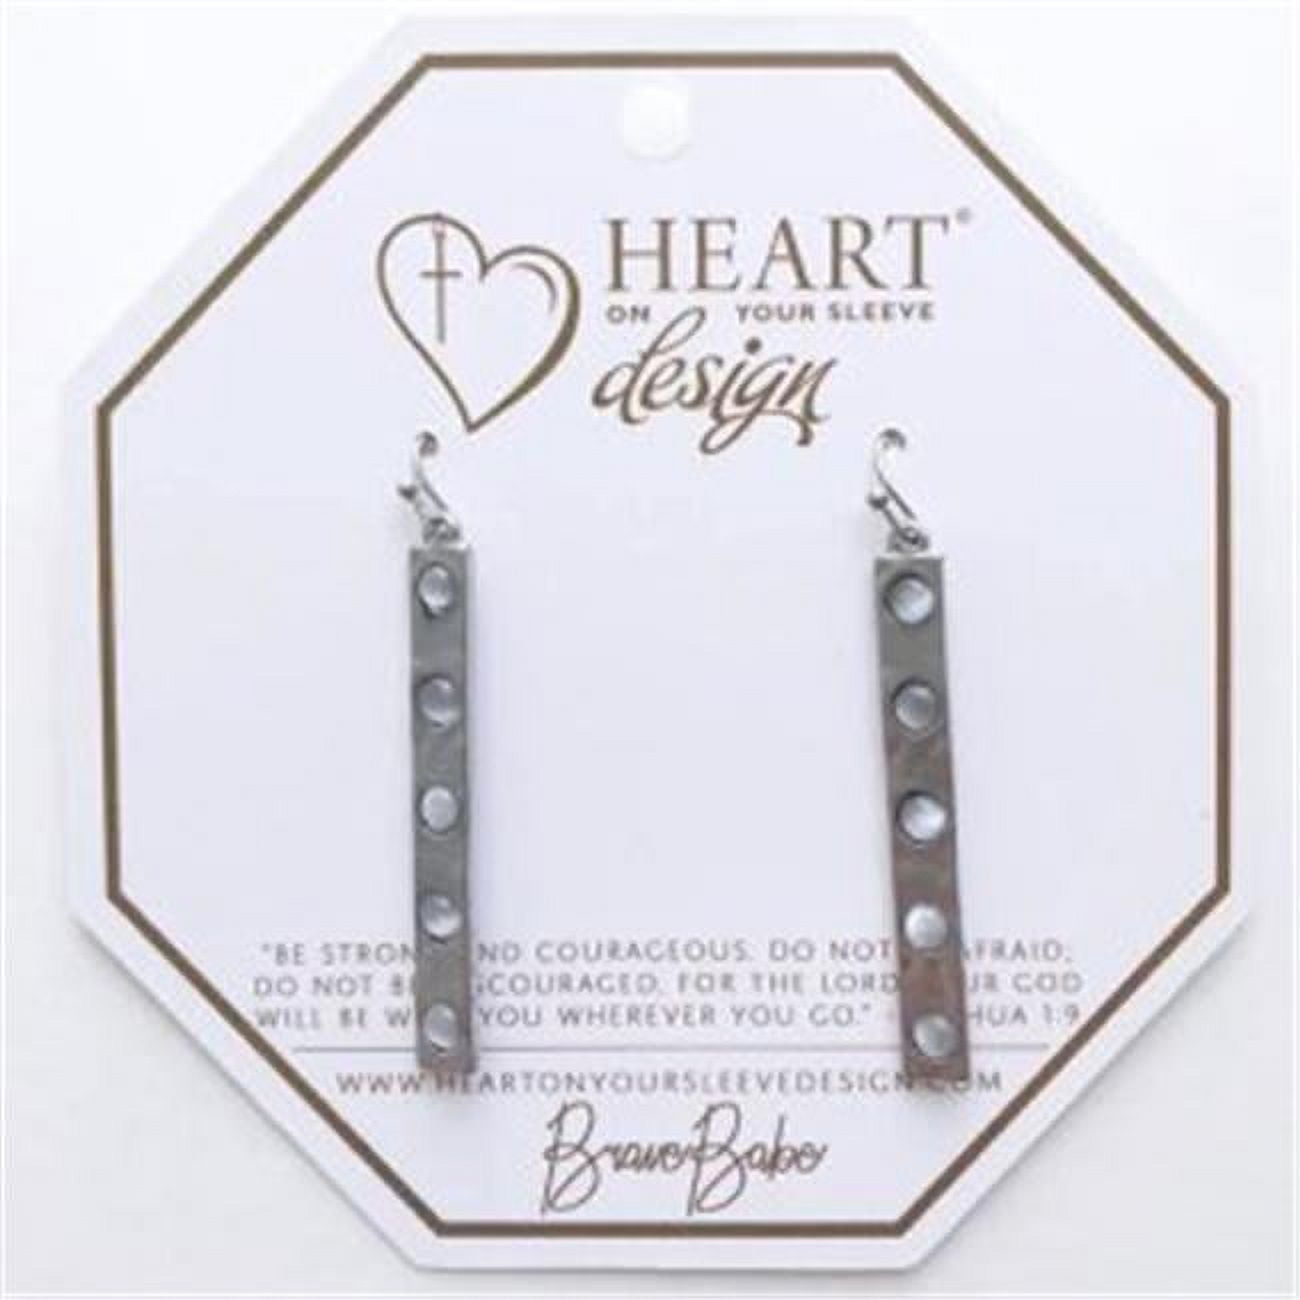 Heart On Your Sleeve Design 139344 2 In. Brave Babe 14k White Gold Bar Brulee Earrings With White Stone Accents